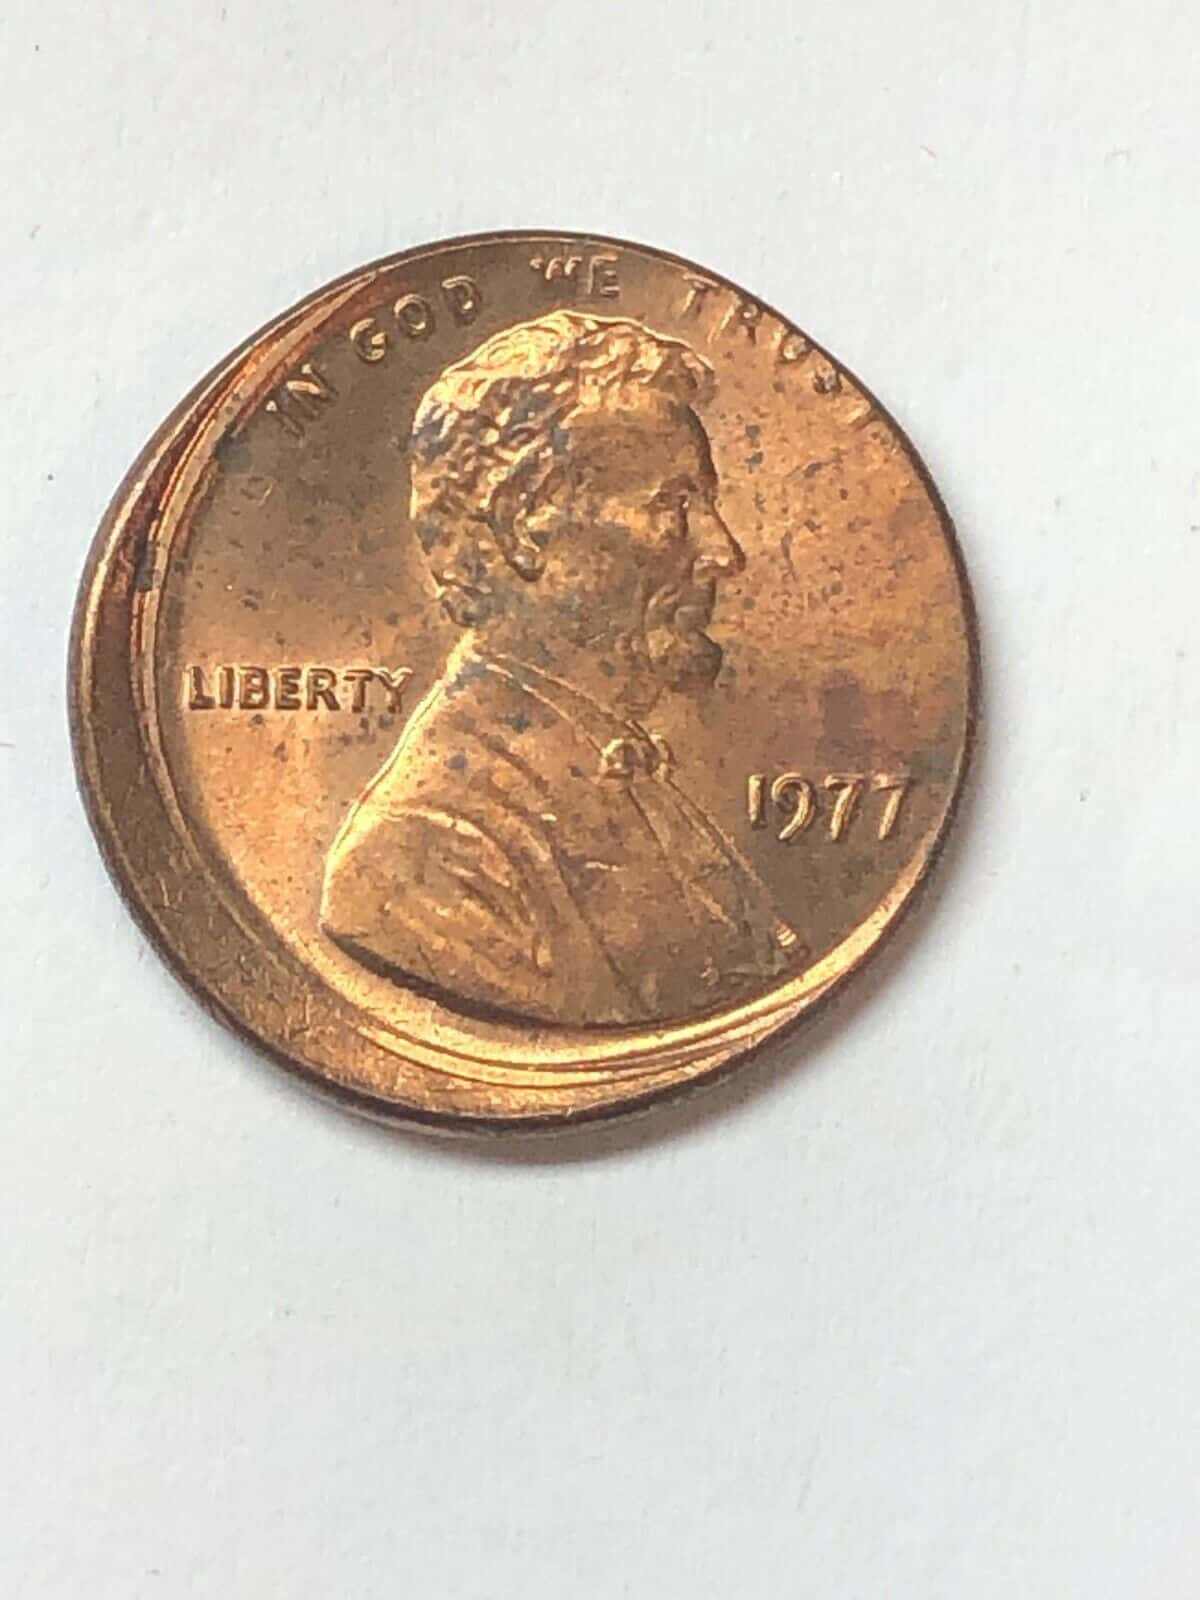 1977 Off-Center Penny